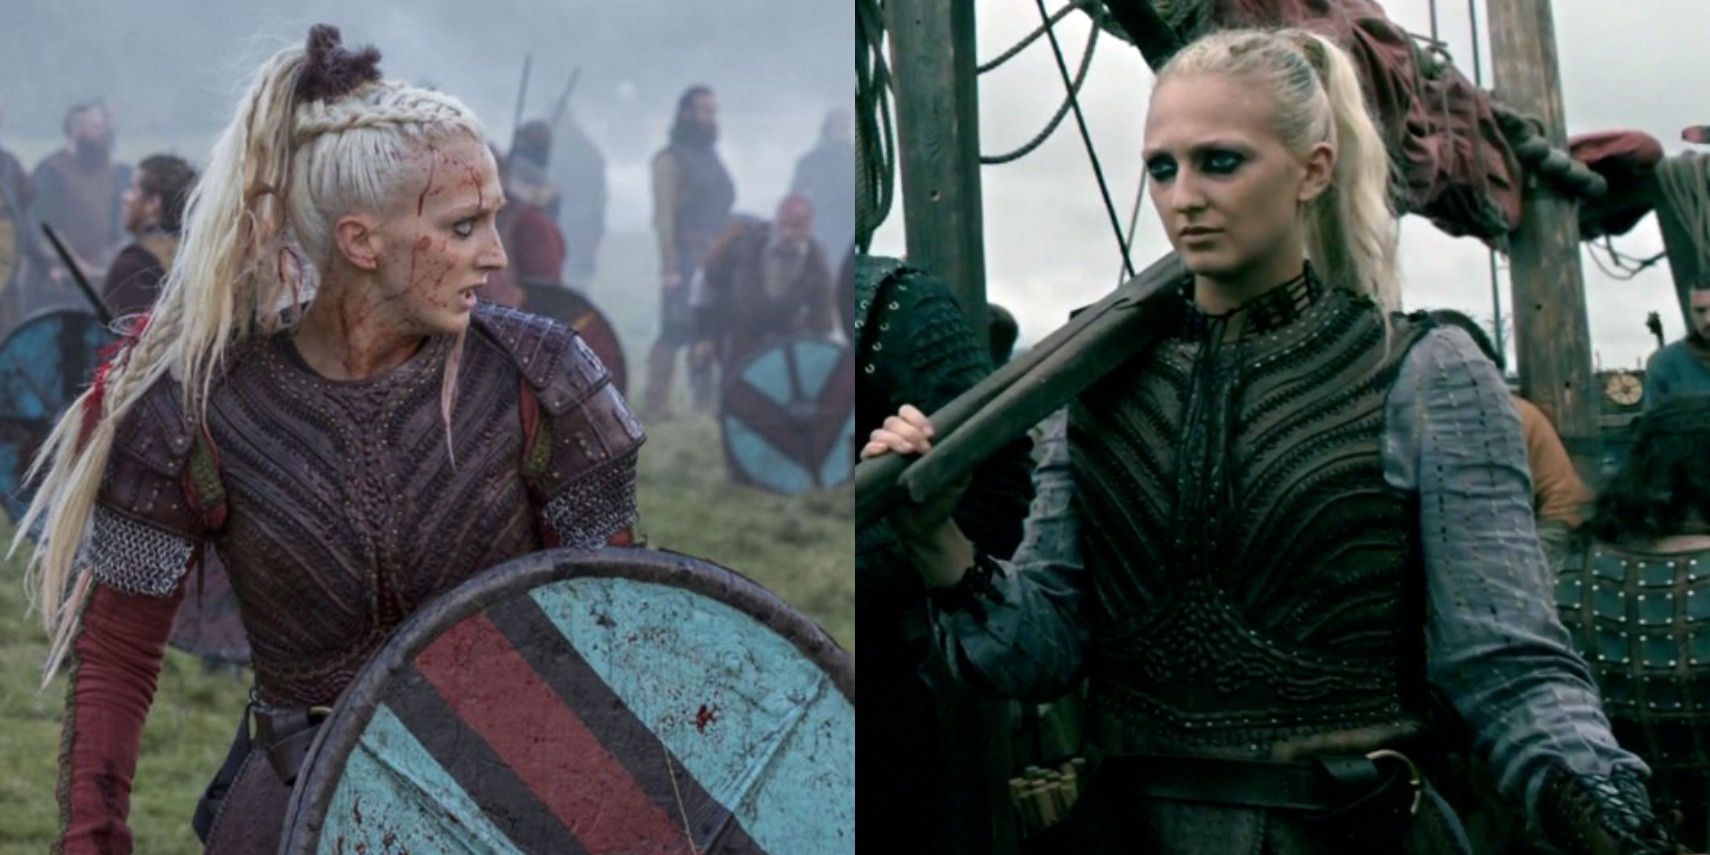 Torvi (Georgia Hirst) looking intense while wearing a high ponytail in &quot;Vikings.&quot;